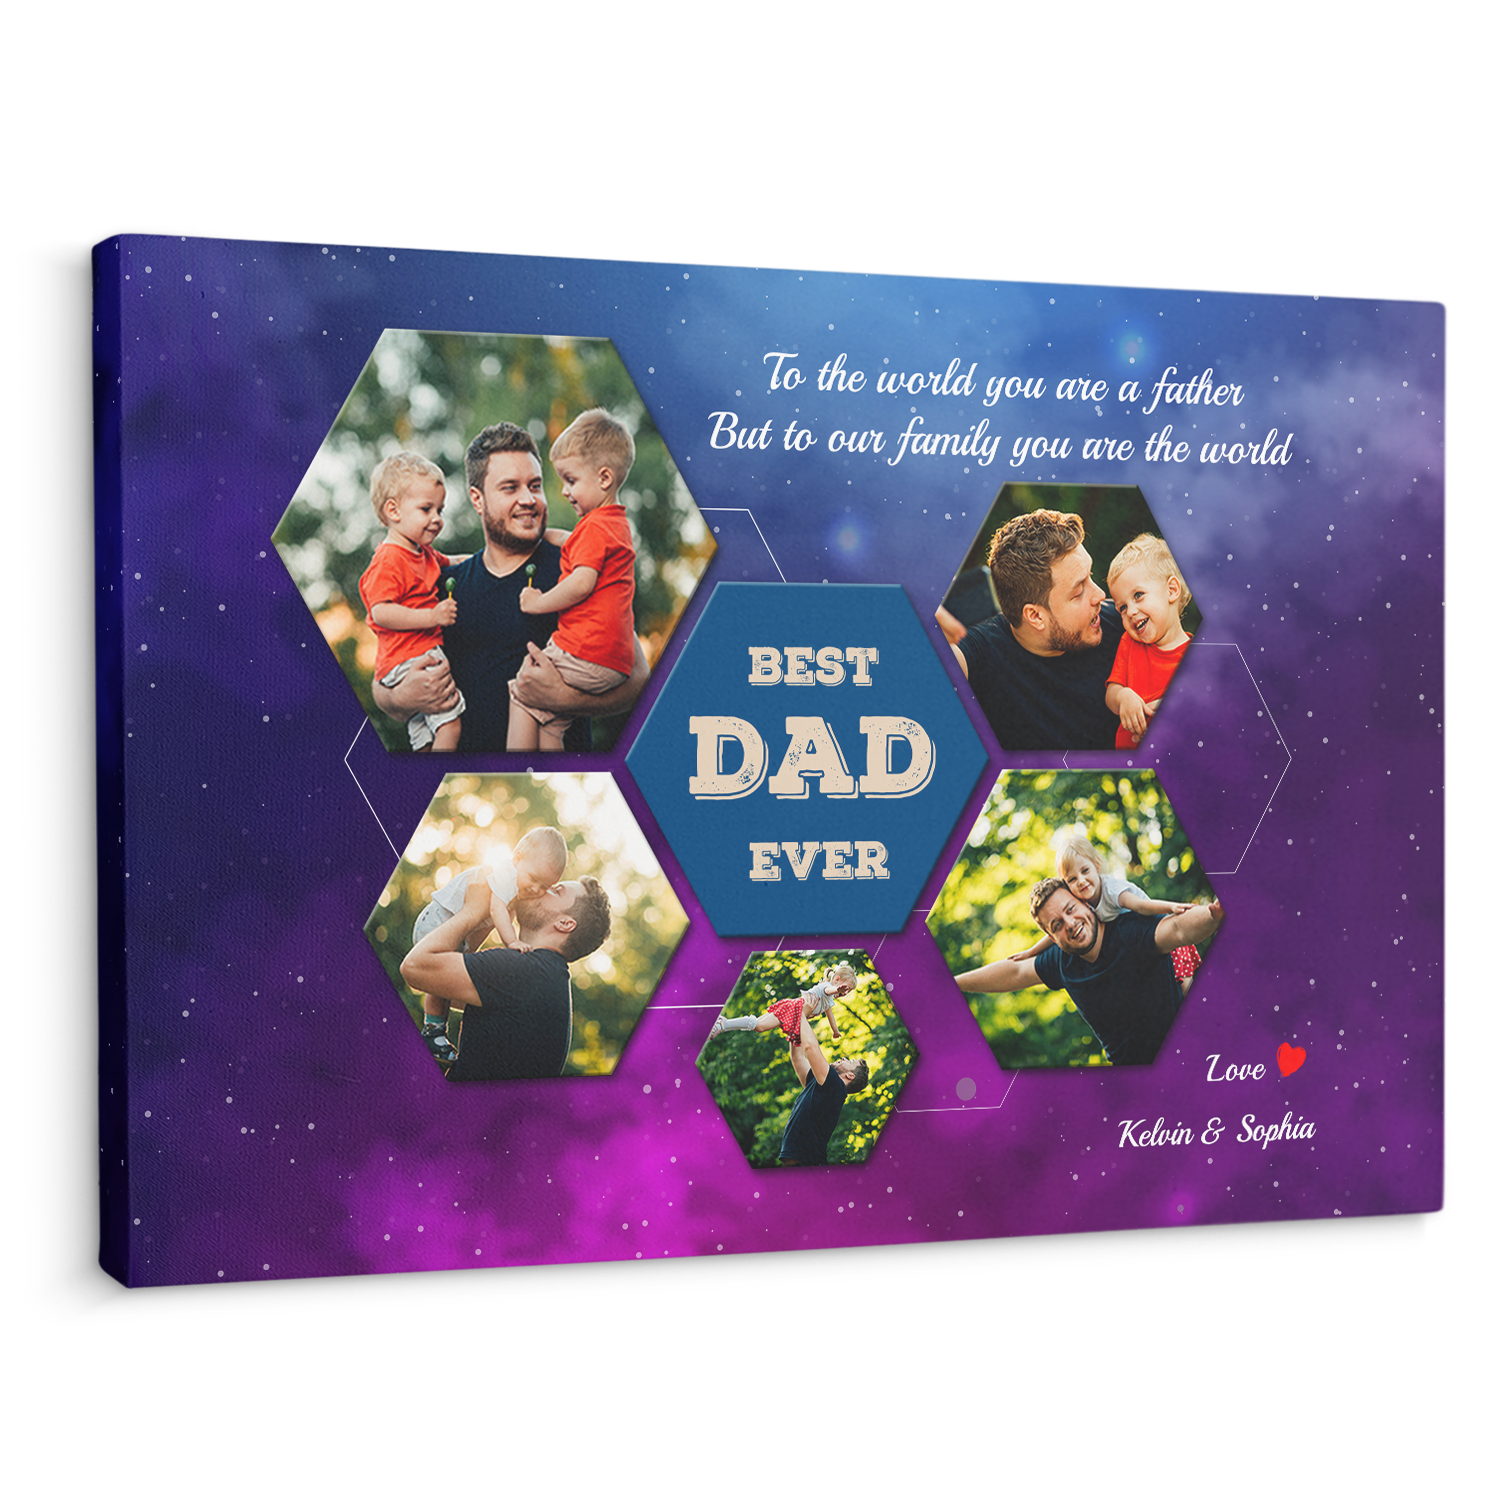 Best Dad Ever Custom Photo Collage - Customizable Galaxy Background Canvas